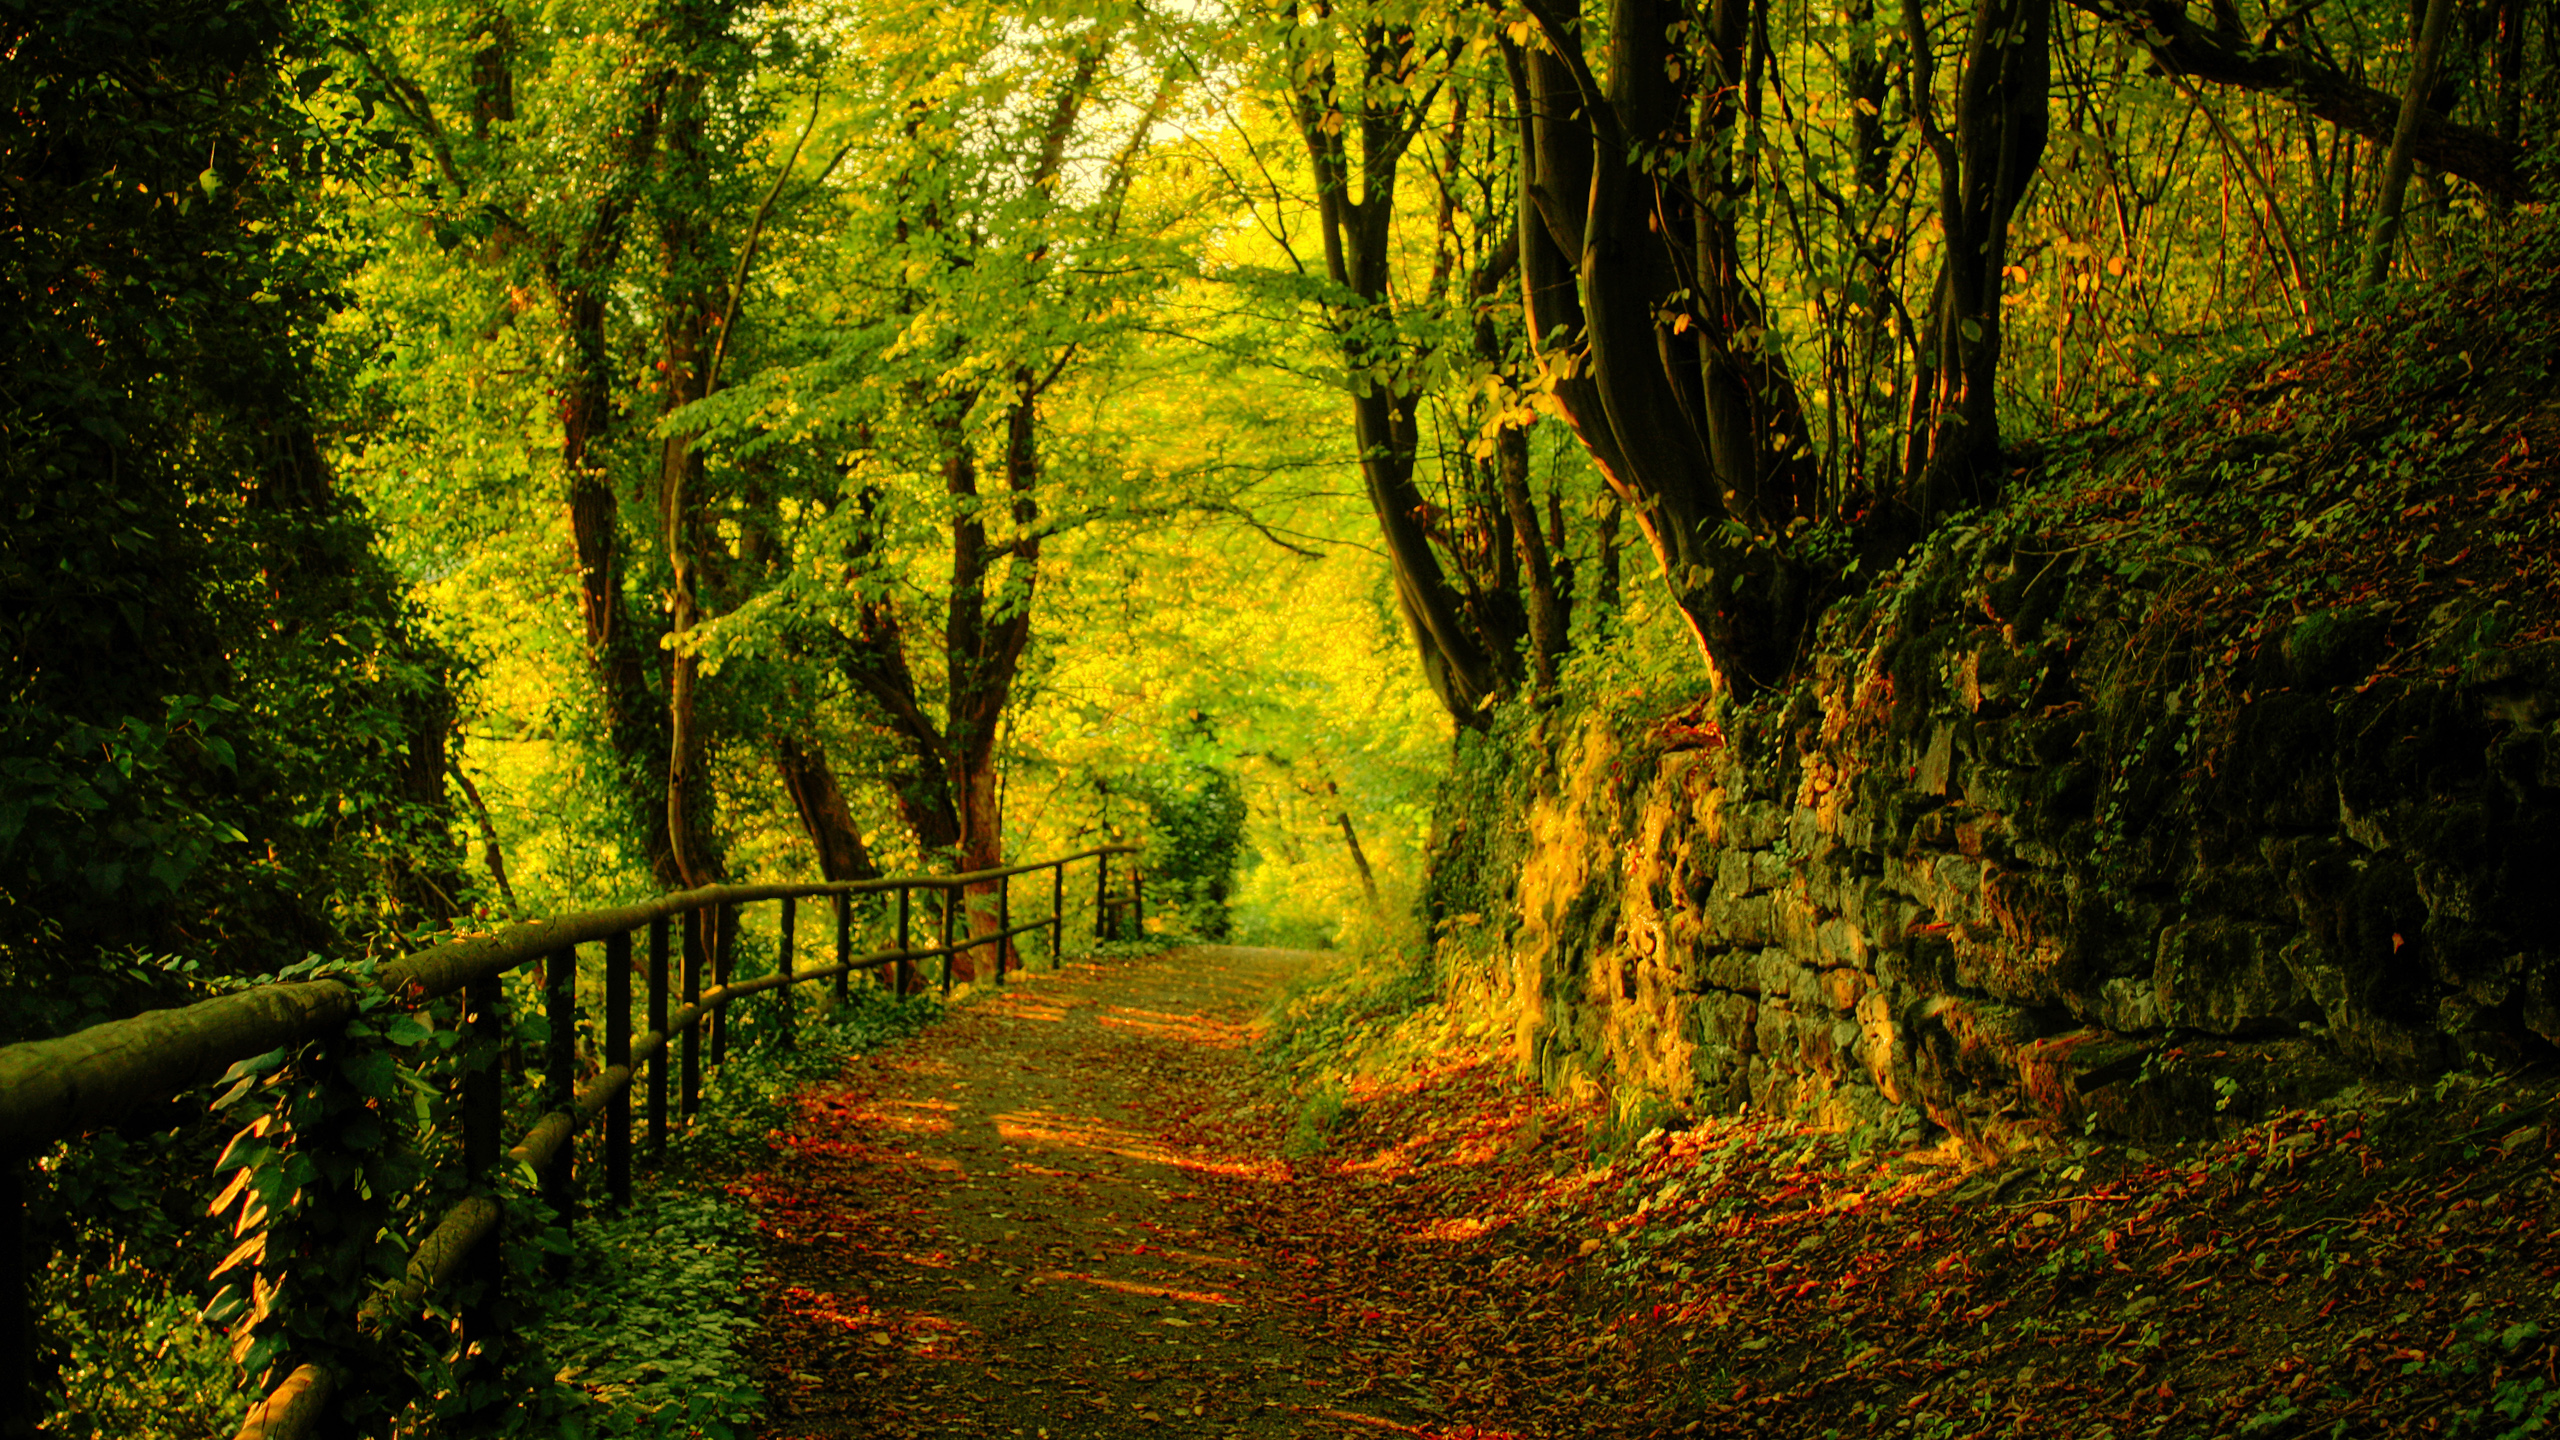 Forest Foliage Wood Fence Rock Wall Pathway Greenery Trees Leaves Vibrant 2560x1440